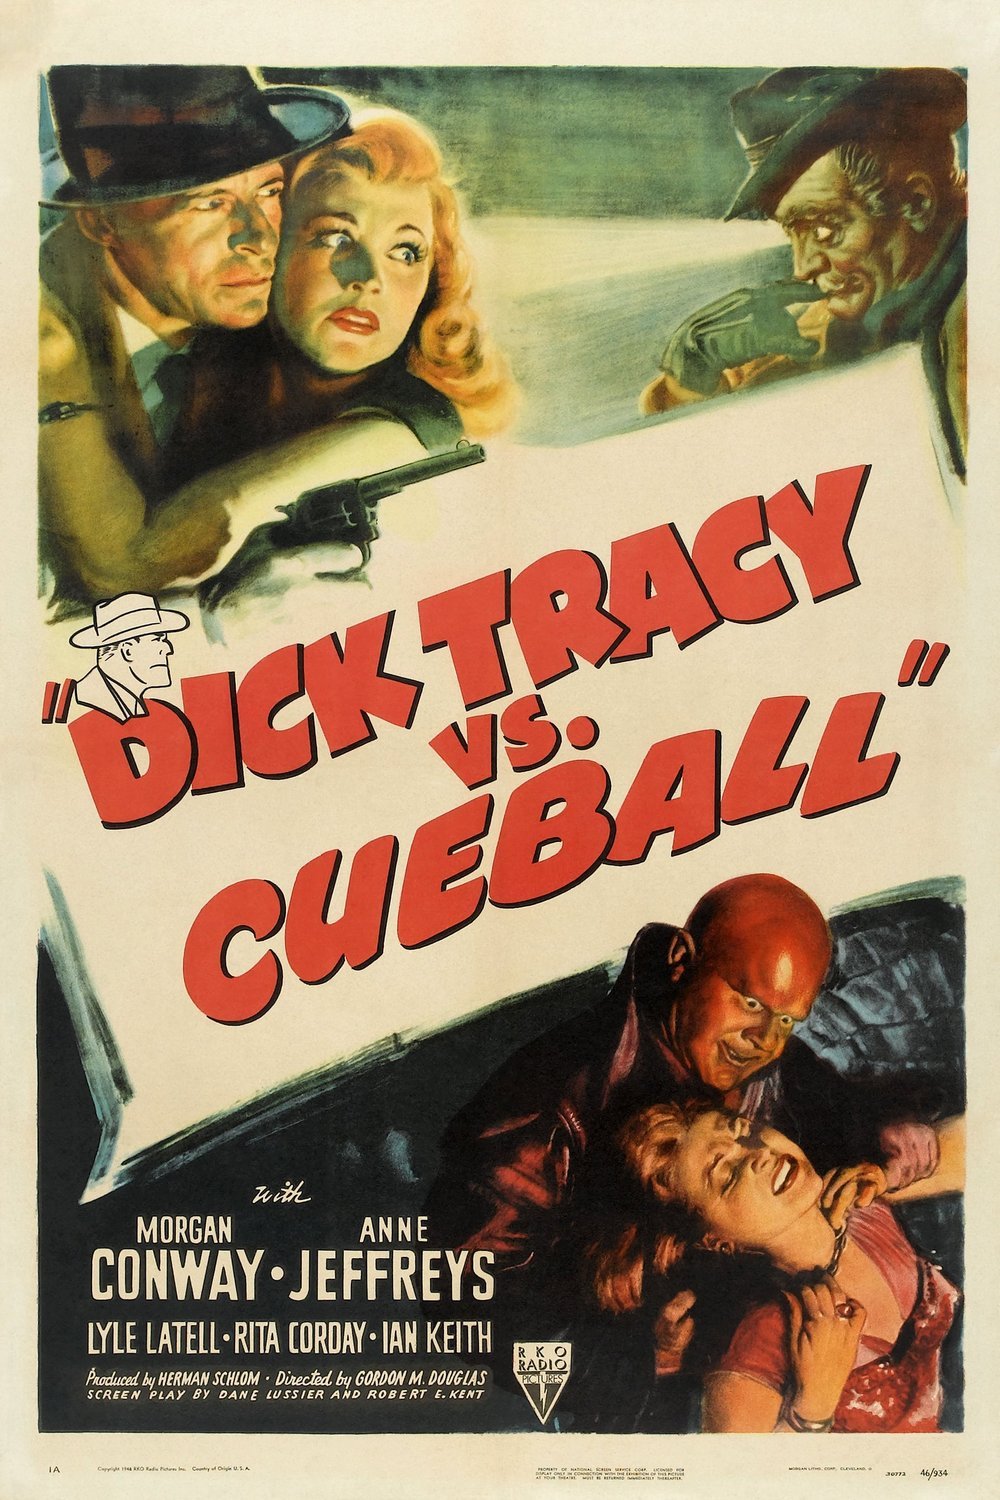 Poster of the movie Dick Tracy vs. Cueball